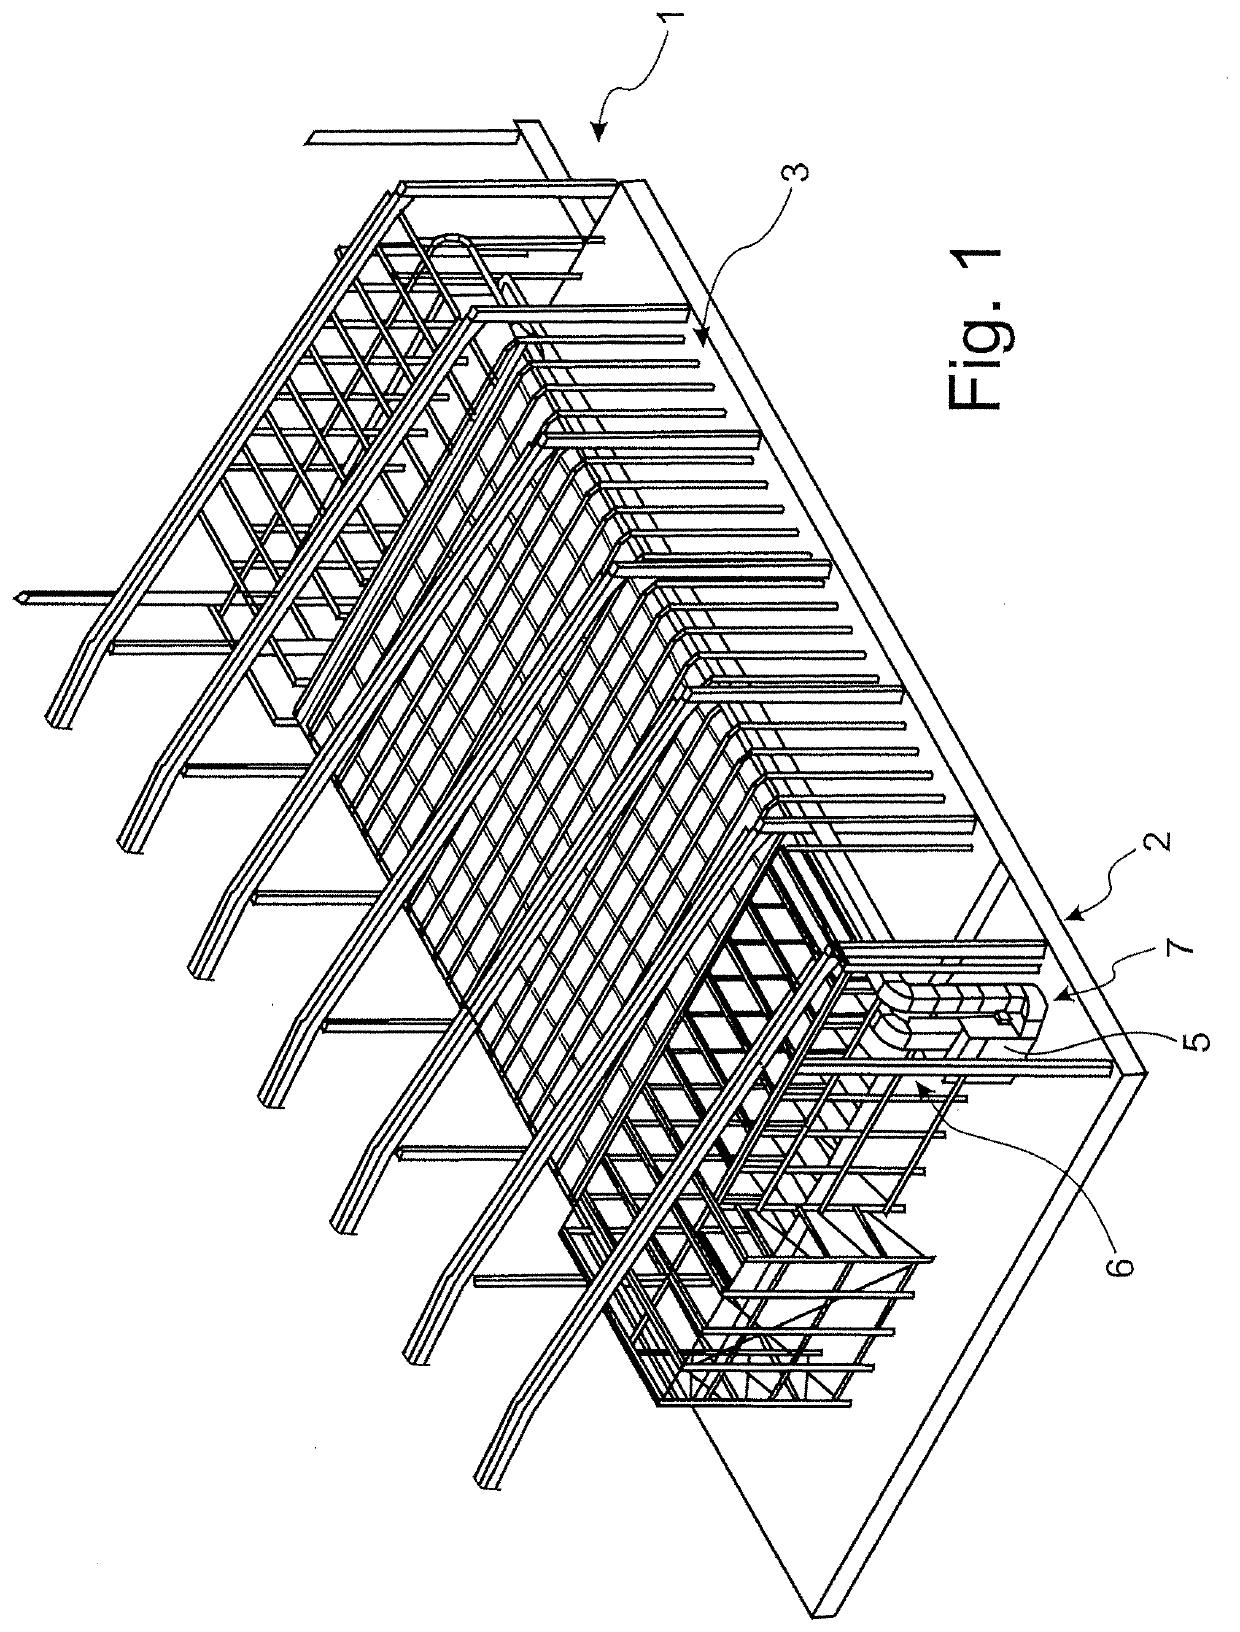 Device for storing objects, in particular for curing objects made of concrete, under defined temperature conditions and humidity conditions